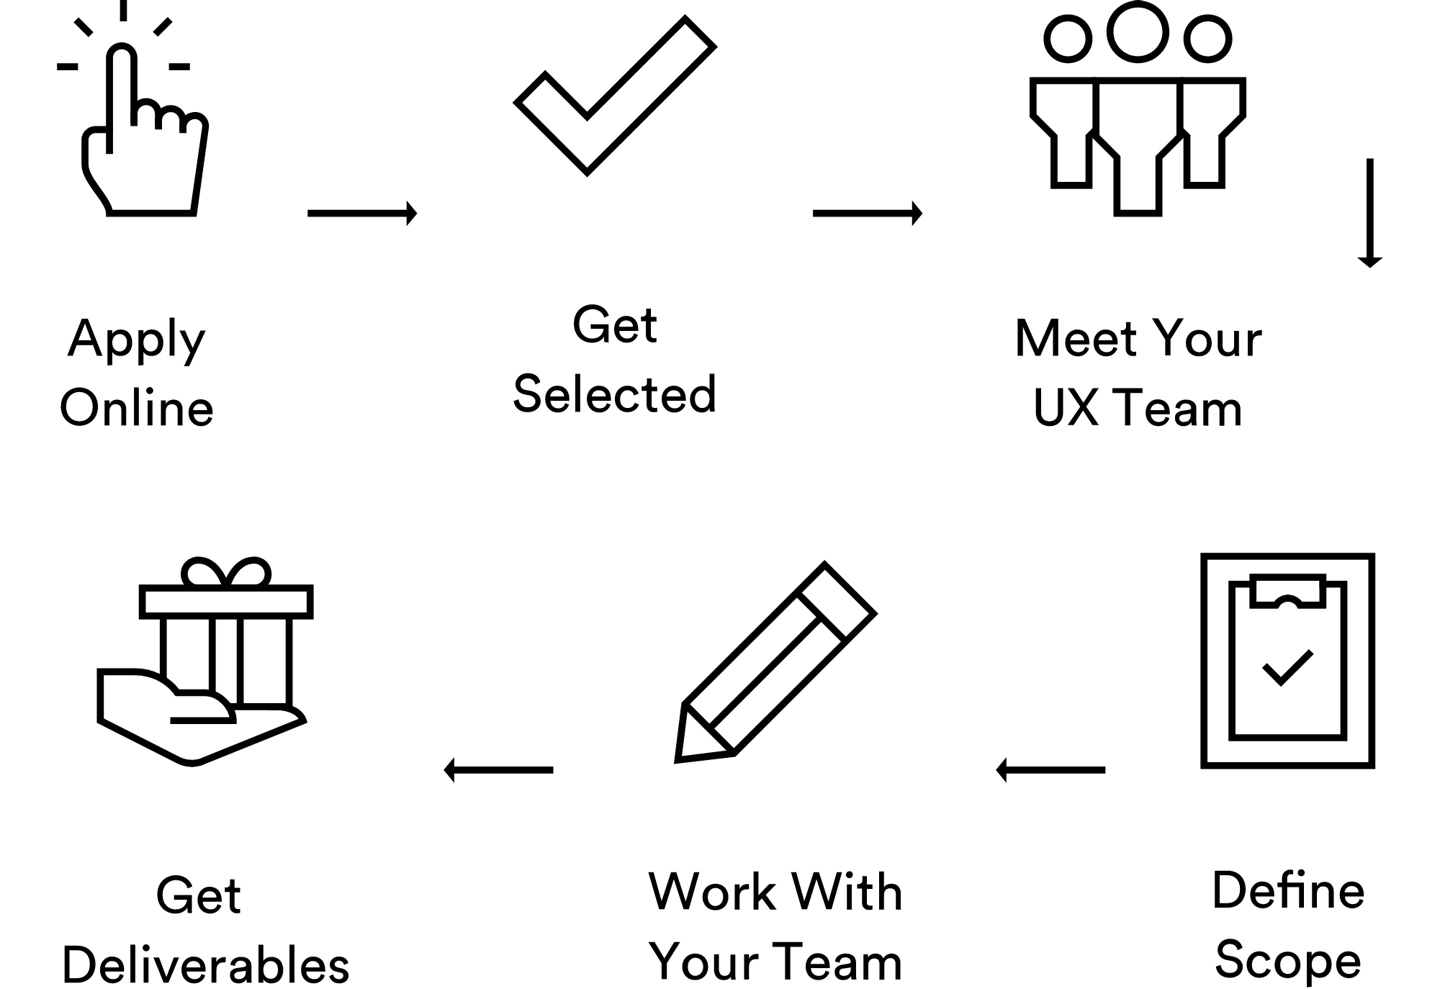 Symbols for process: Apply Online, Get Selected, Meet Your UX Team, Define Scope, Work with Your Team, and Get Deliverables